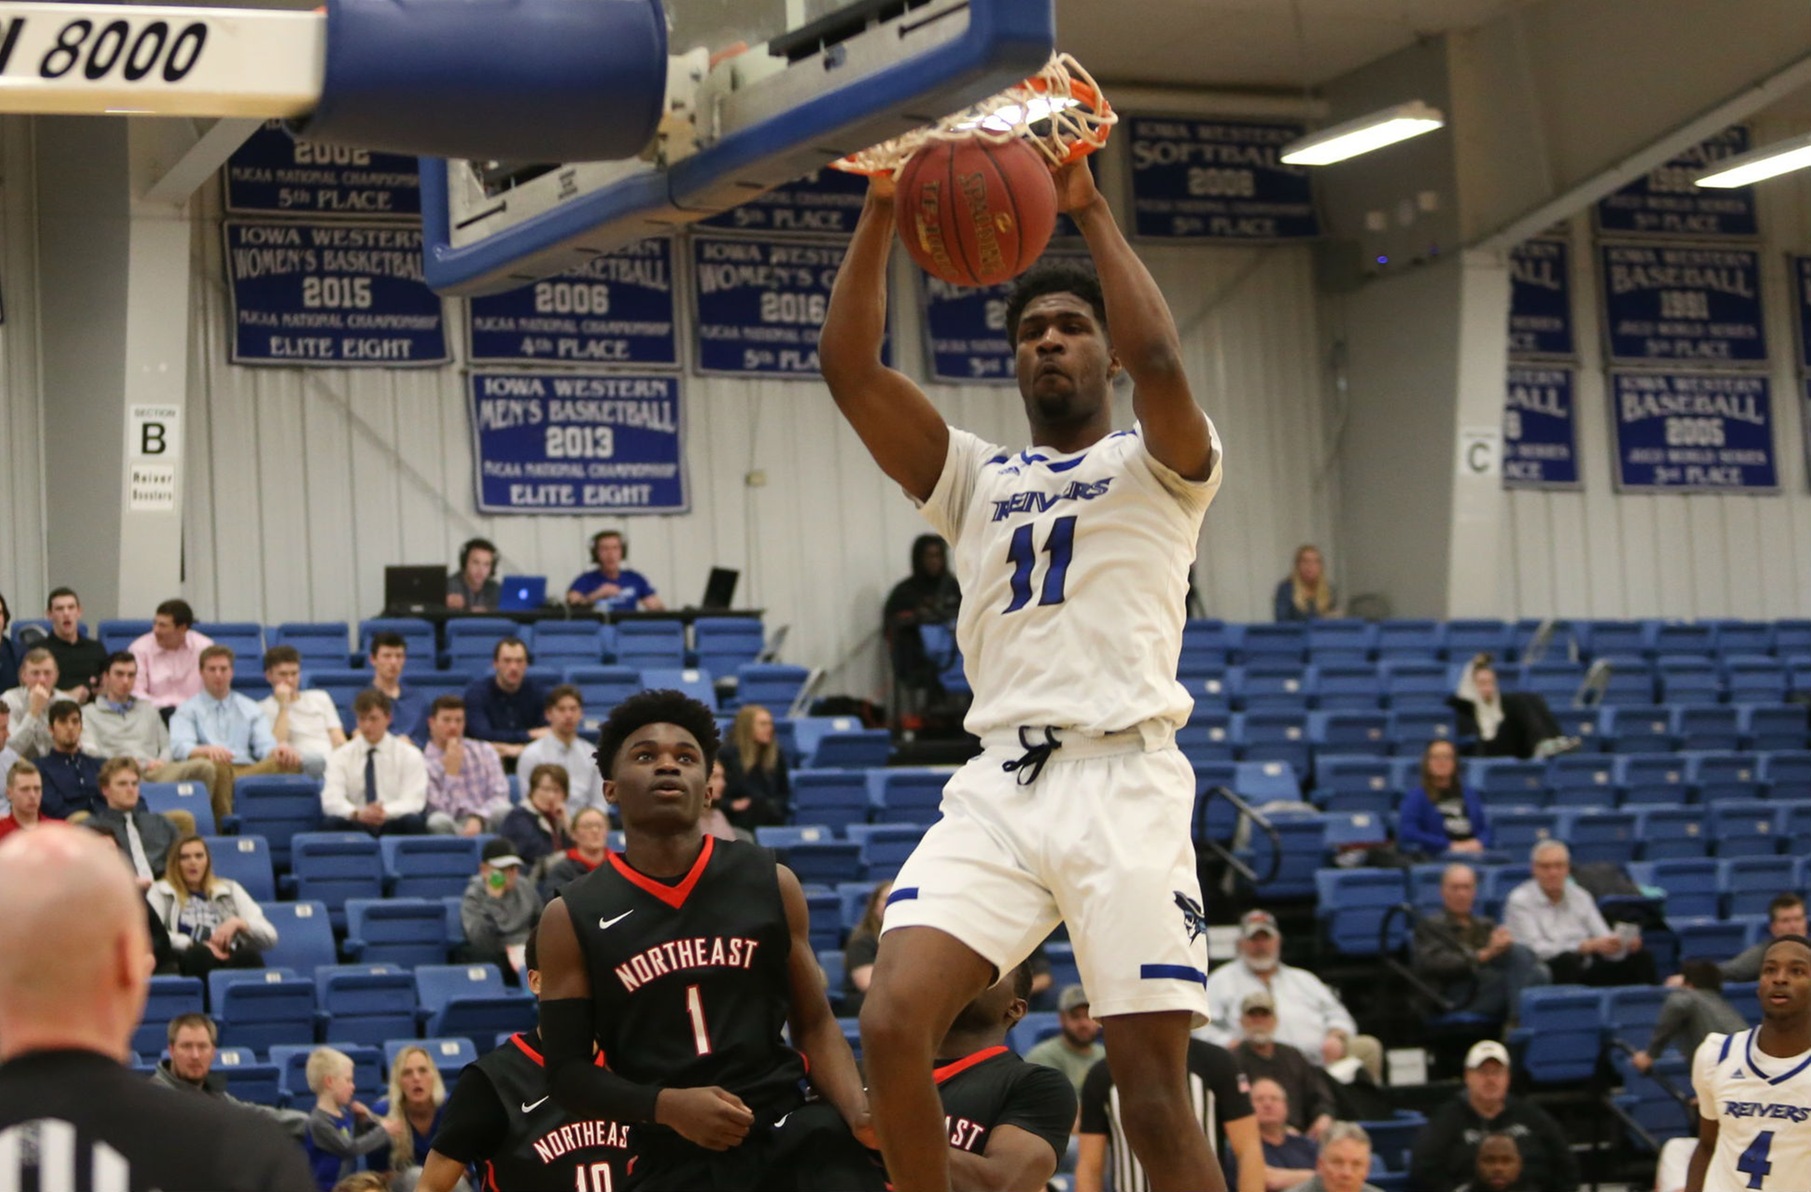 Seneca Louis collected 10 points and 7 rebounds as he and his Reiver teammates stayed within one game of first place in ICCAC play with a 82-59 win over Northeast.